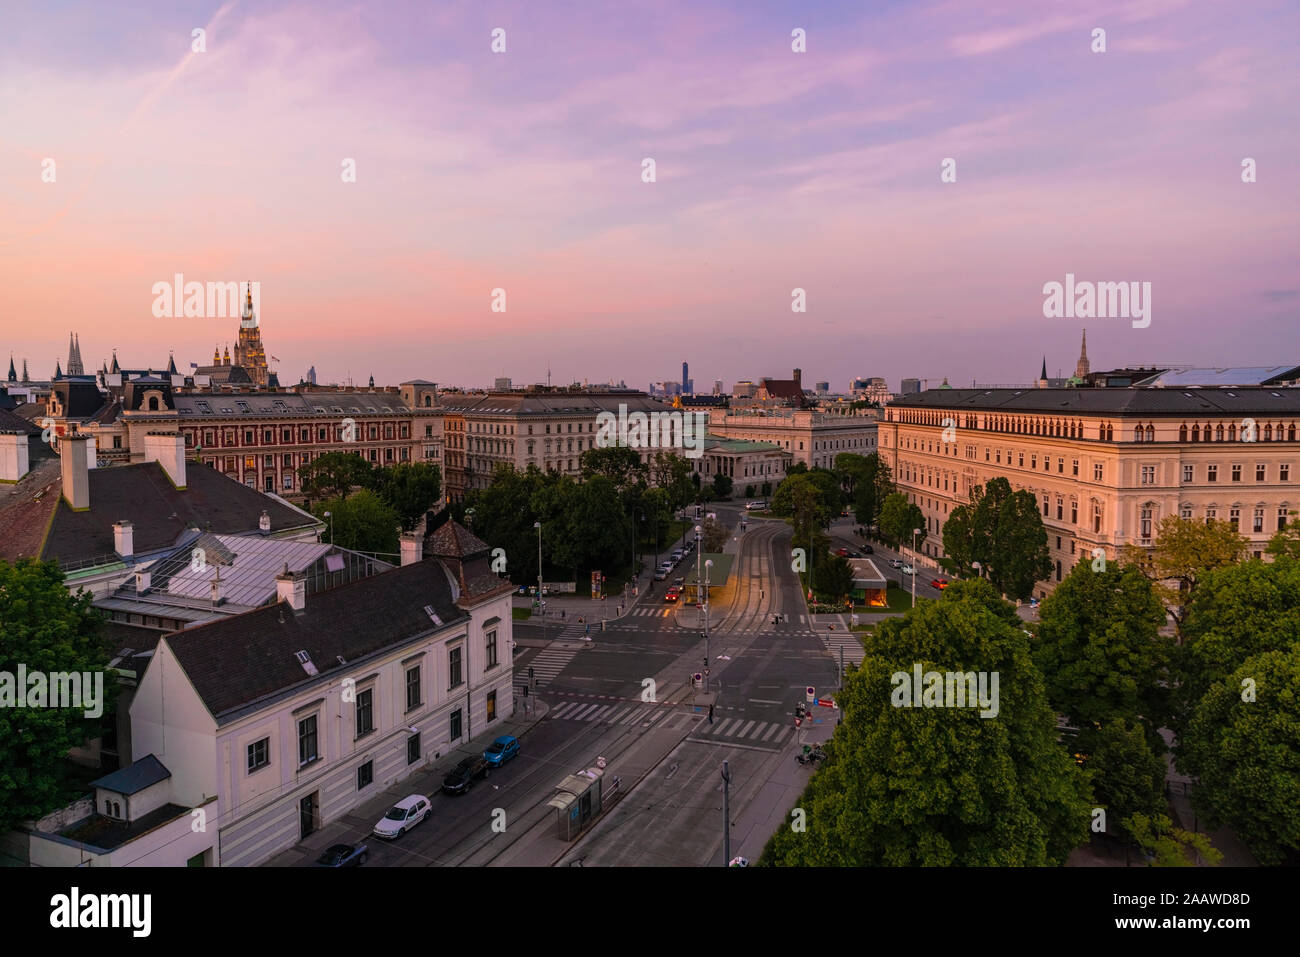 Historic center of Vienna against sky during sunset, Austria Stock Photo